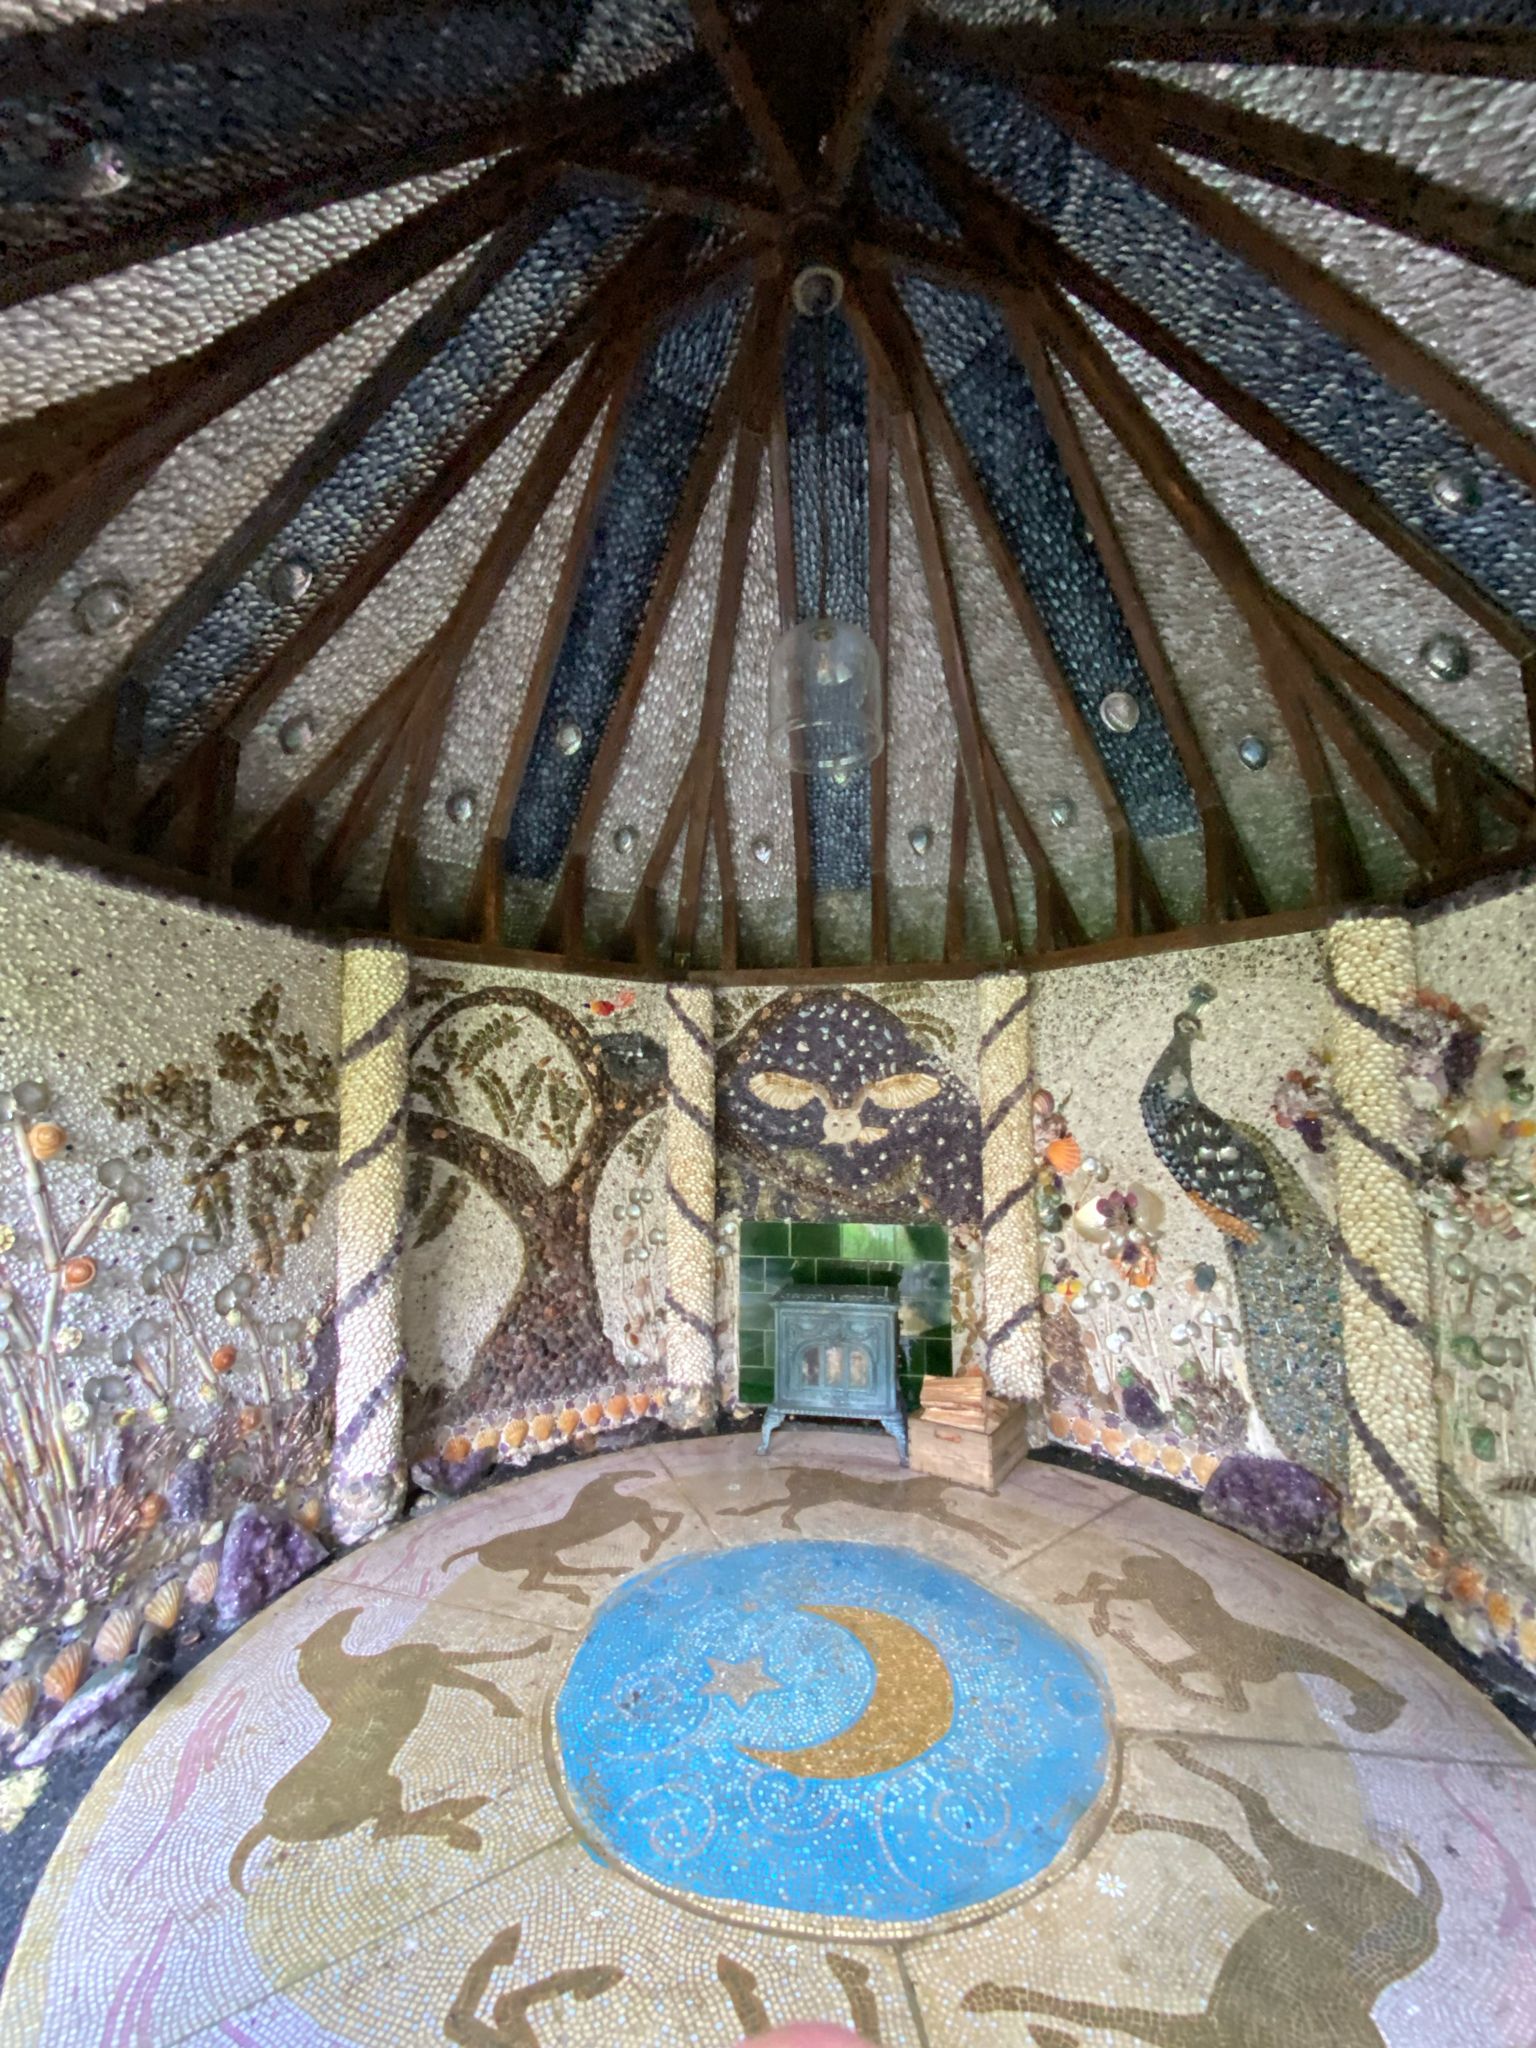 Inside the intricately decorated garden room that has woodworm